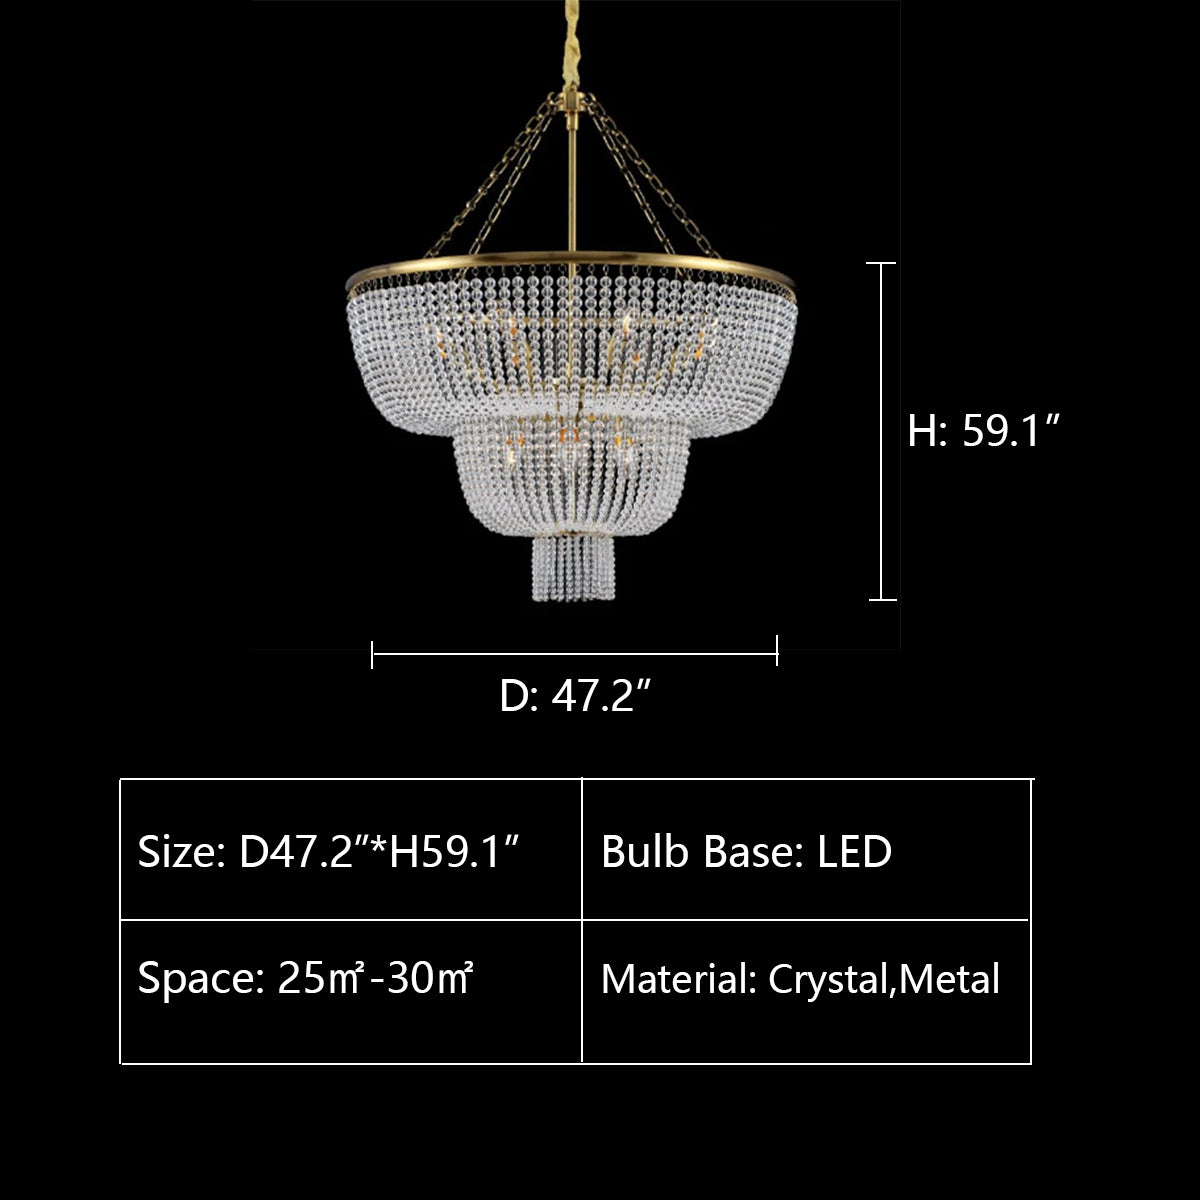 D47.2"*H59.1" chandelier,chandeliers,boho,modern,bead,crystal,chain,living room,dining room,foyer,entryance,ceiling,tiers,layers,round,circle,ring